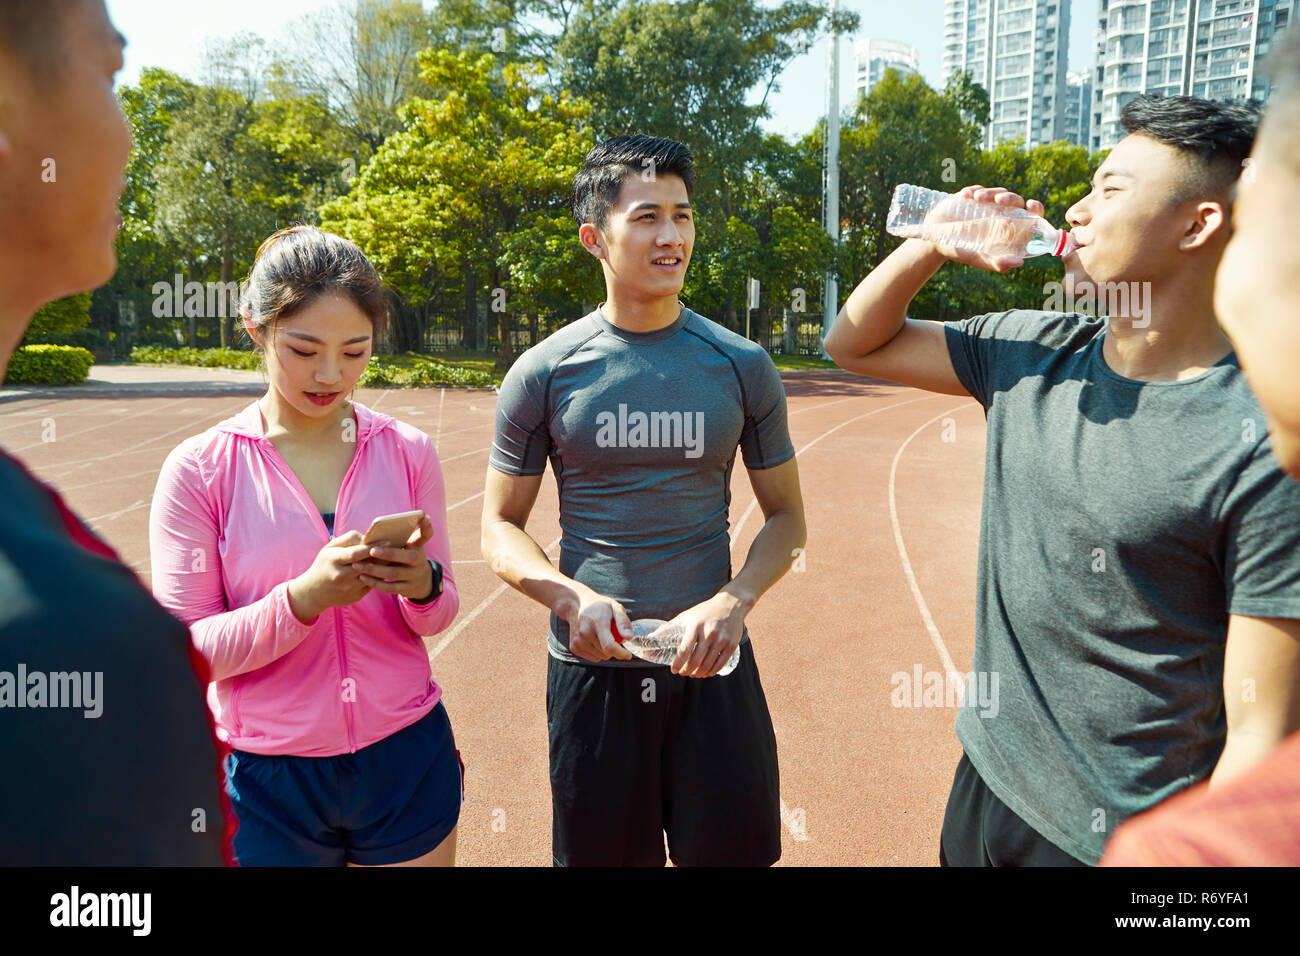 group of young asian athletes talking and relaxing on track after training. Stock Photo